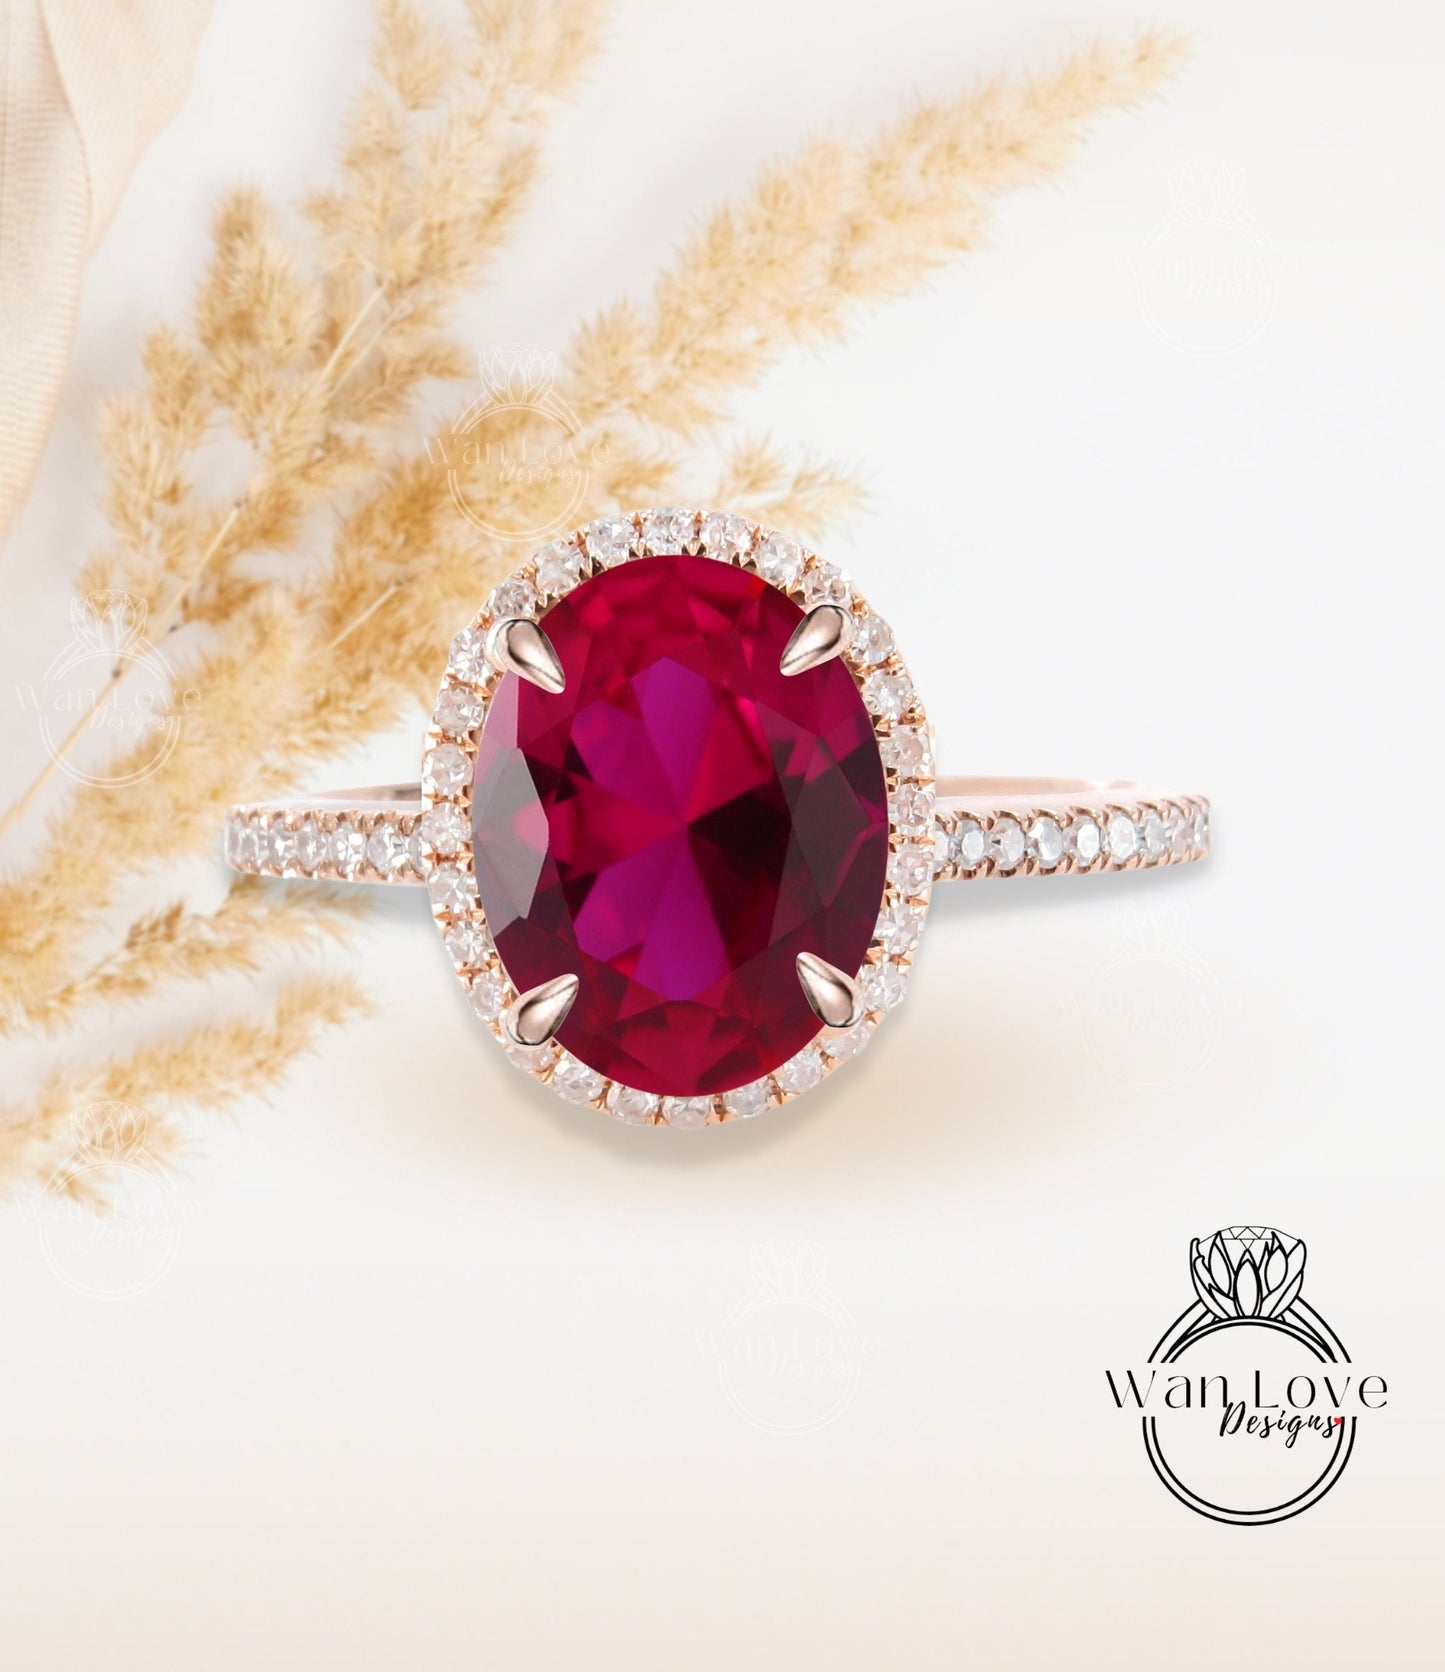 Oval cut Ruby engagement ring art deco ring halo moissanite/diamond ring vintage rose gold half eternity unique anniversary bridal ring Wan Love Designs